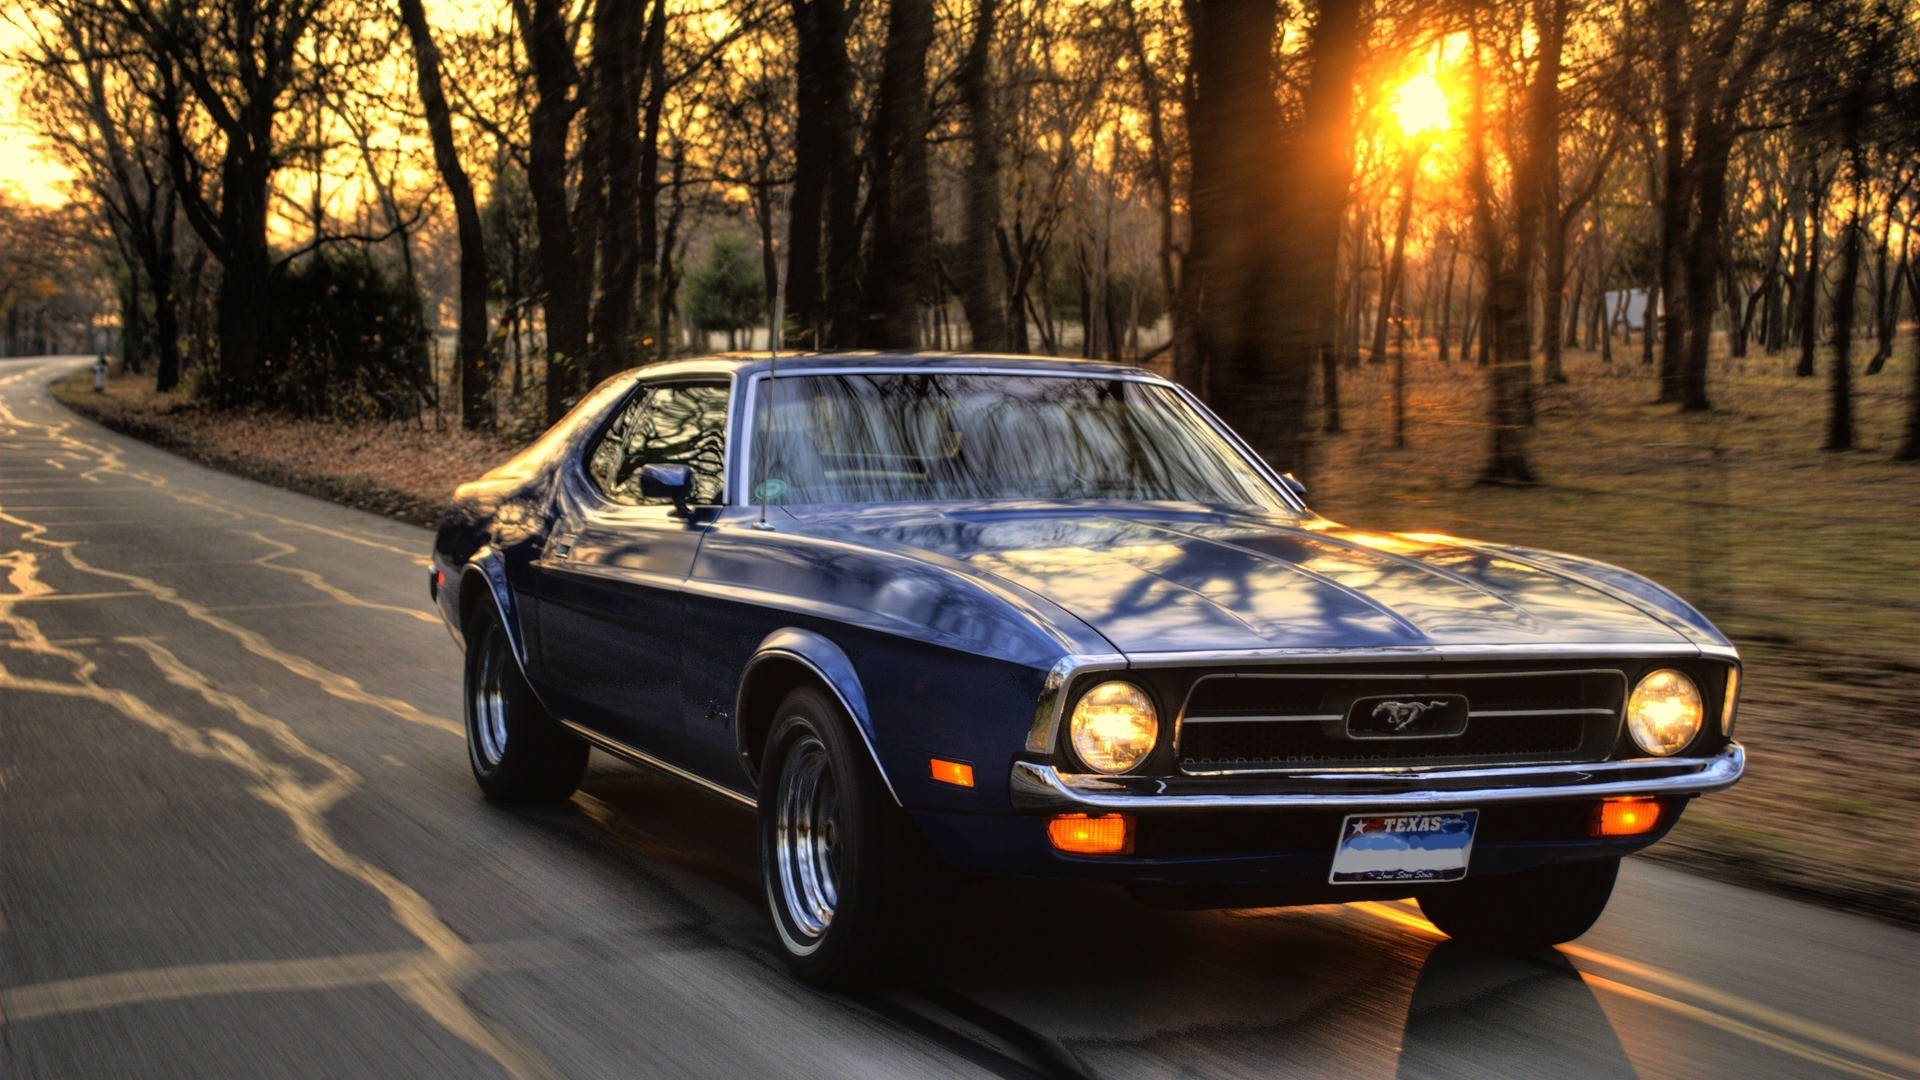 1920x1080 High Resolution American Muscle Car Wide Wallpaper Full Size .